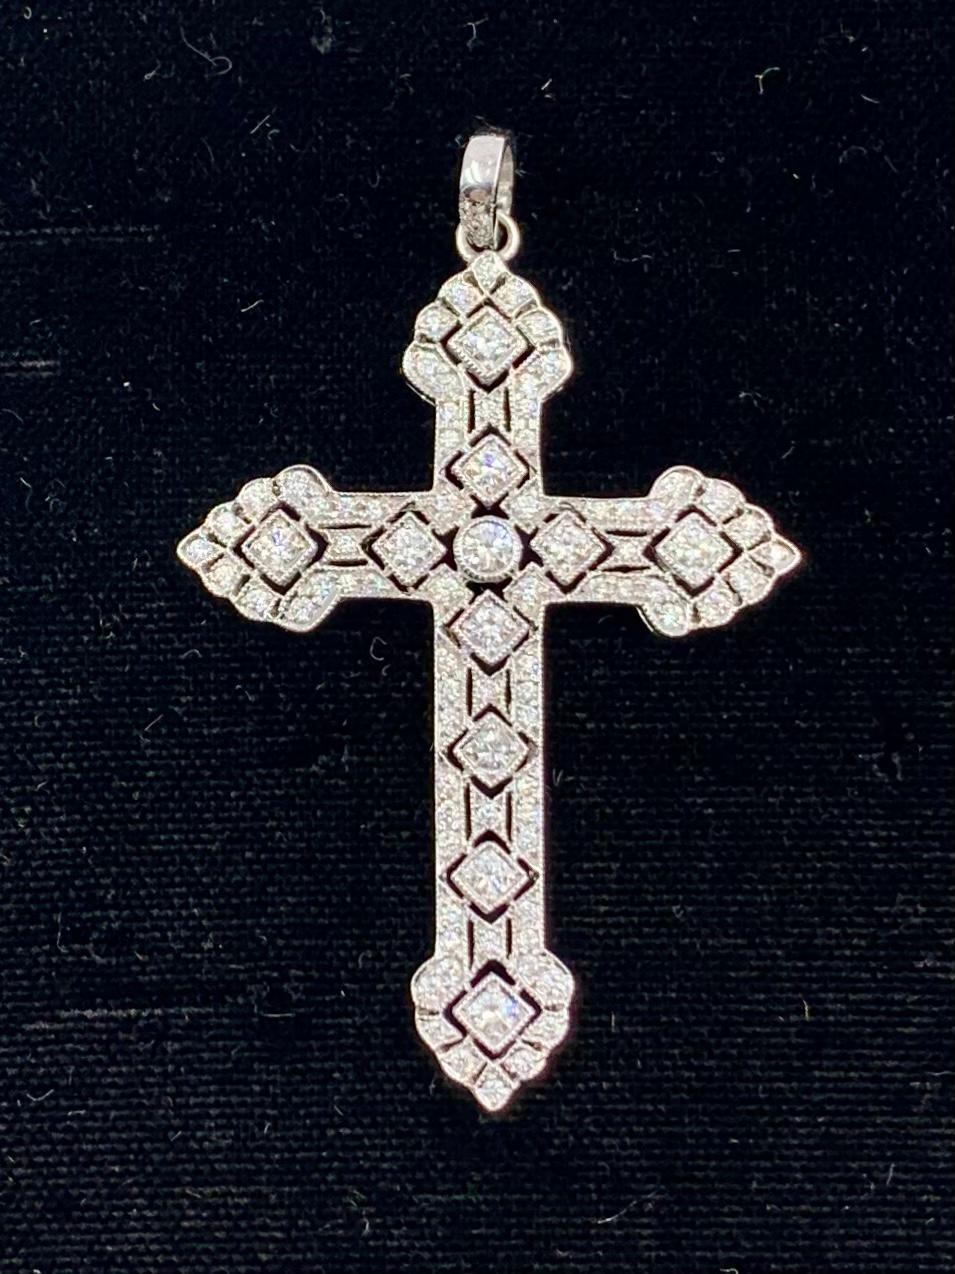 Antique Edwardian Diamond 18K White Gold Fine Reticulated Cross For Sale 5